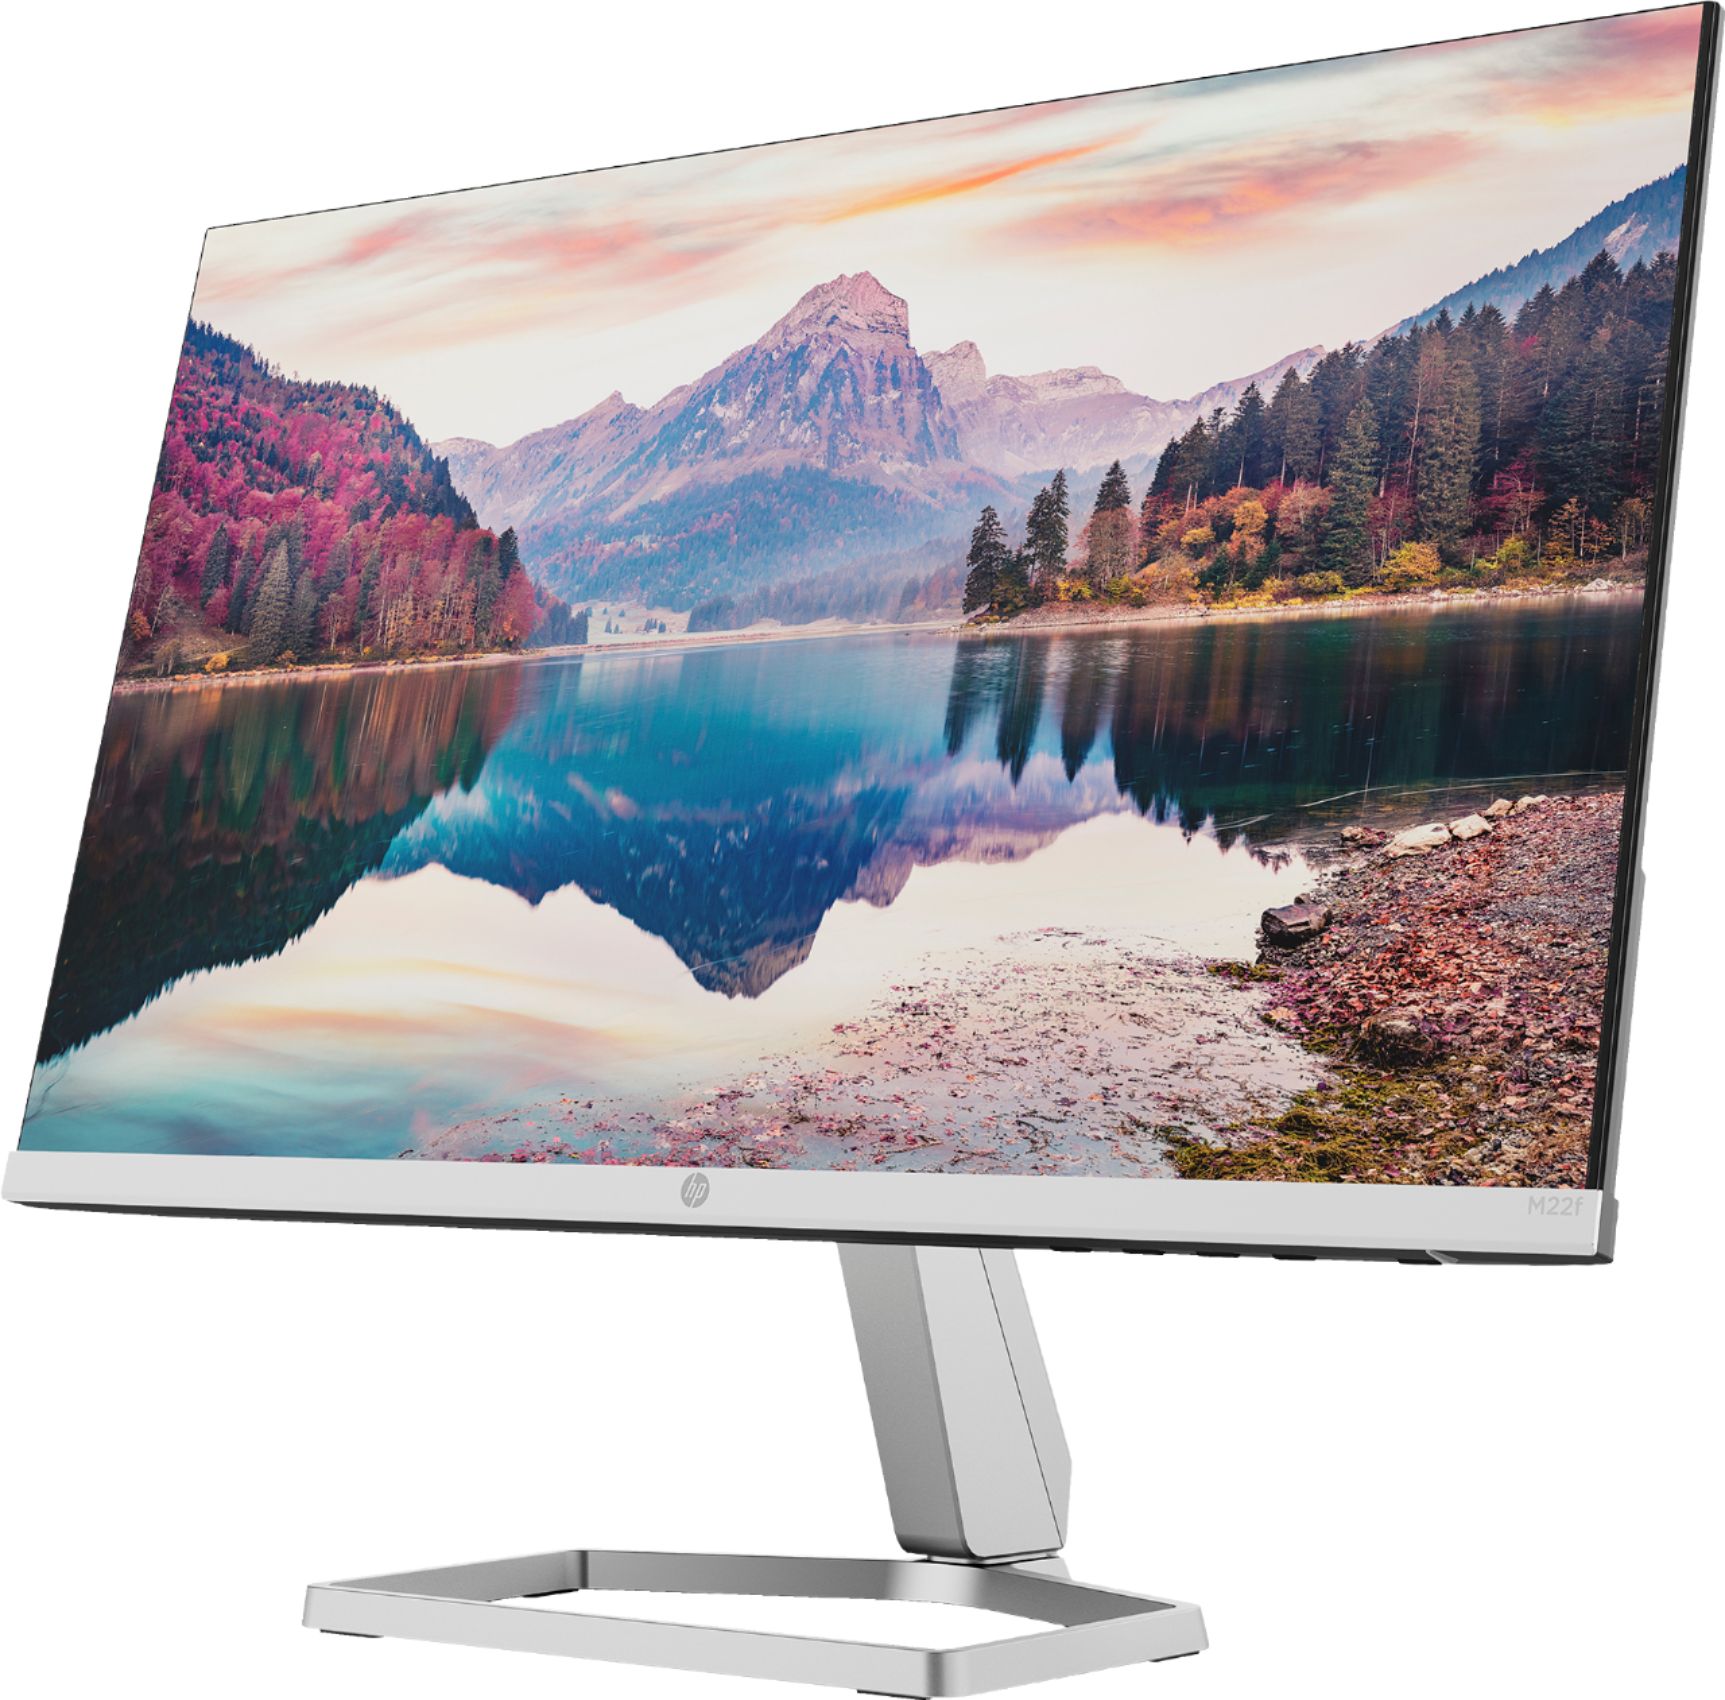 Angle View: HP - Geek Squad Certified Refurbished 21.5" IPS LED FHD FreeSync Monitor - Silver & Black